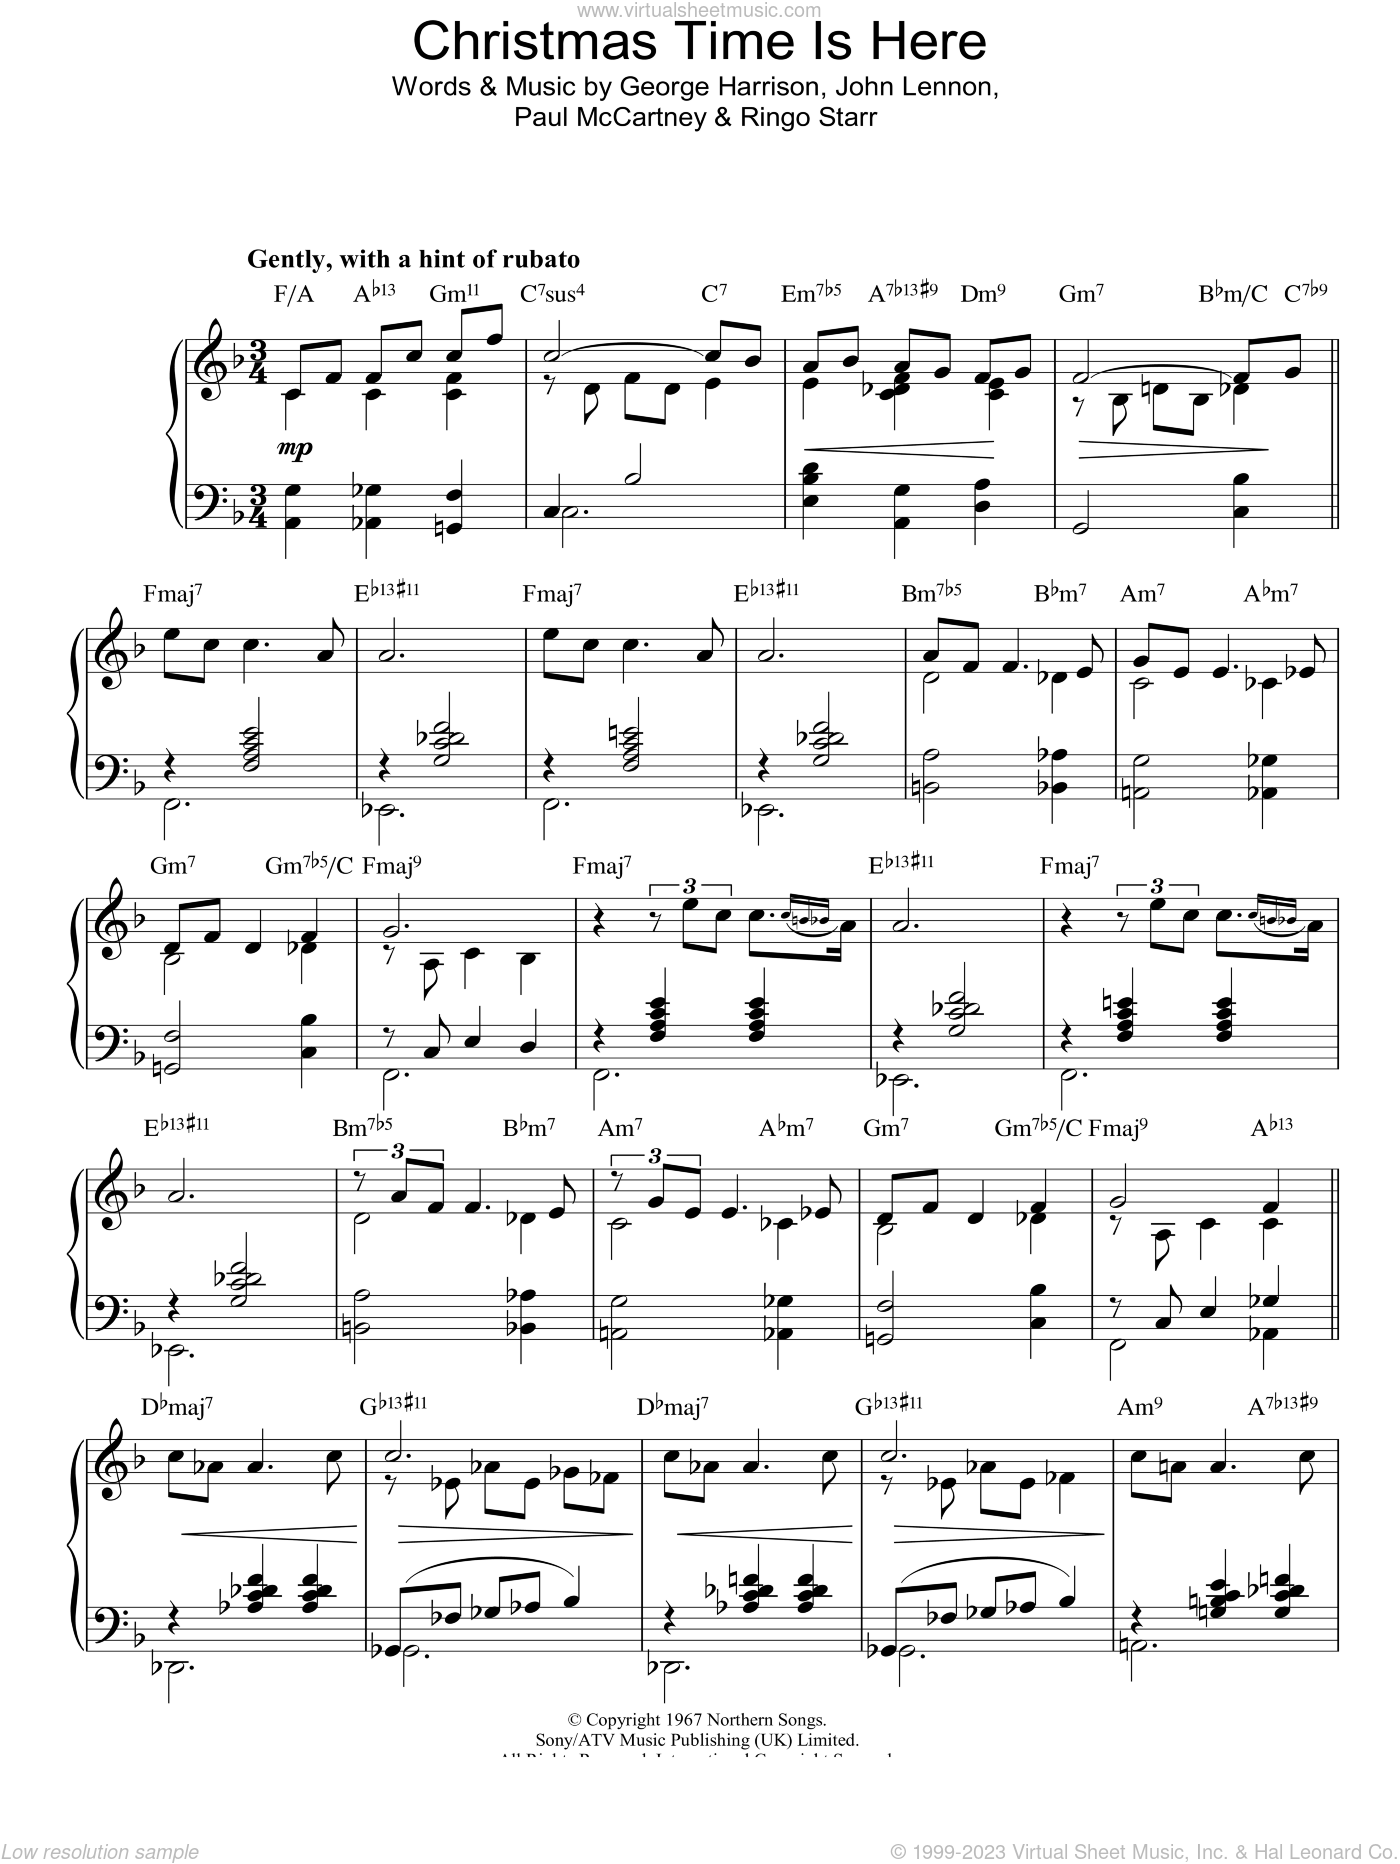 Beatles - Christmas Time (Is Here Again) sheet music for piano solo